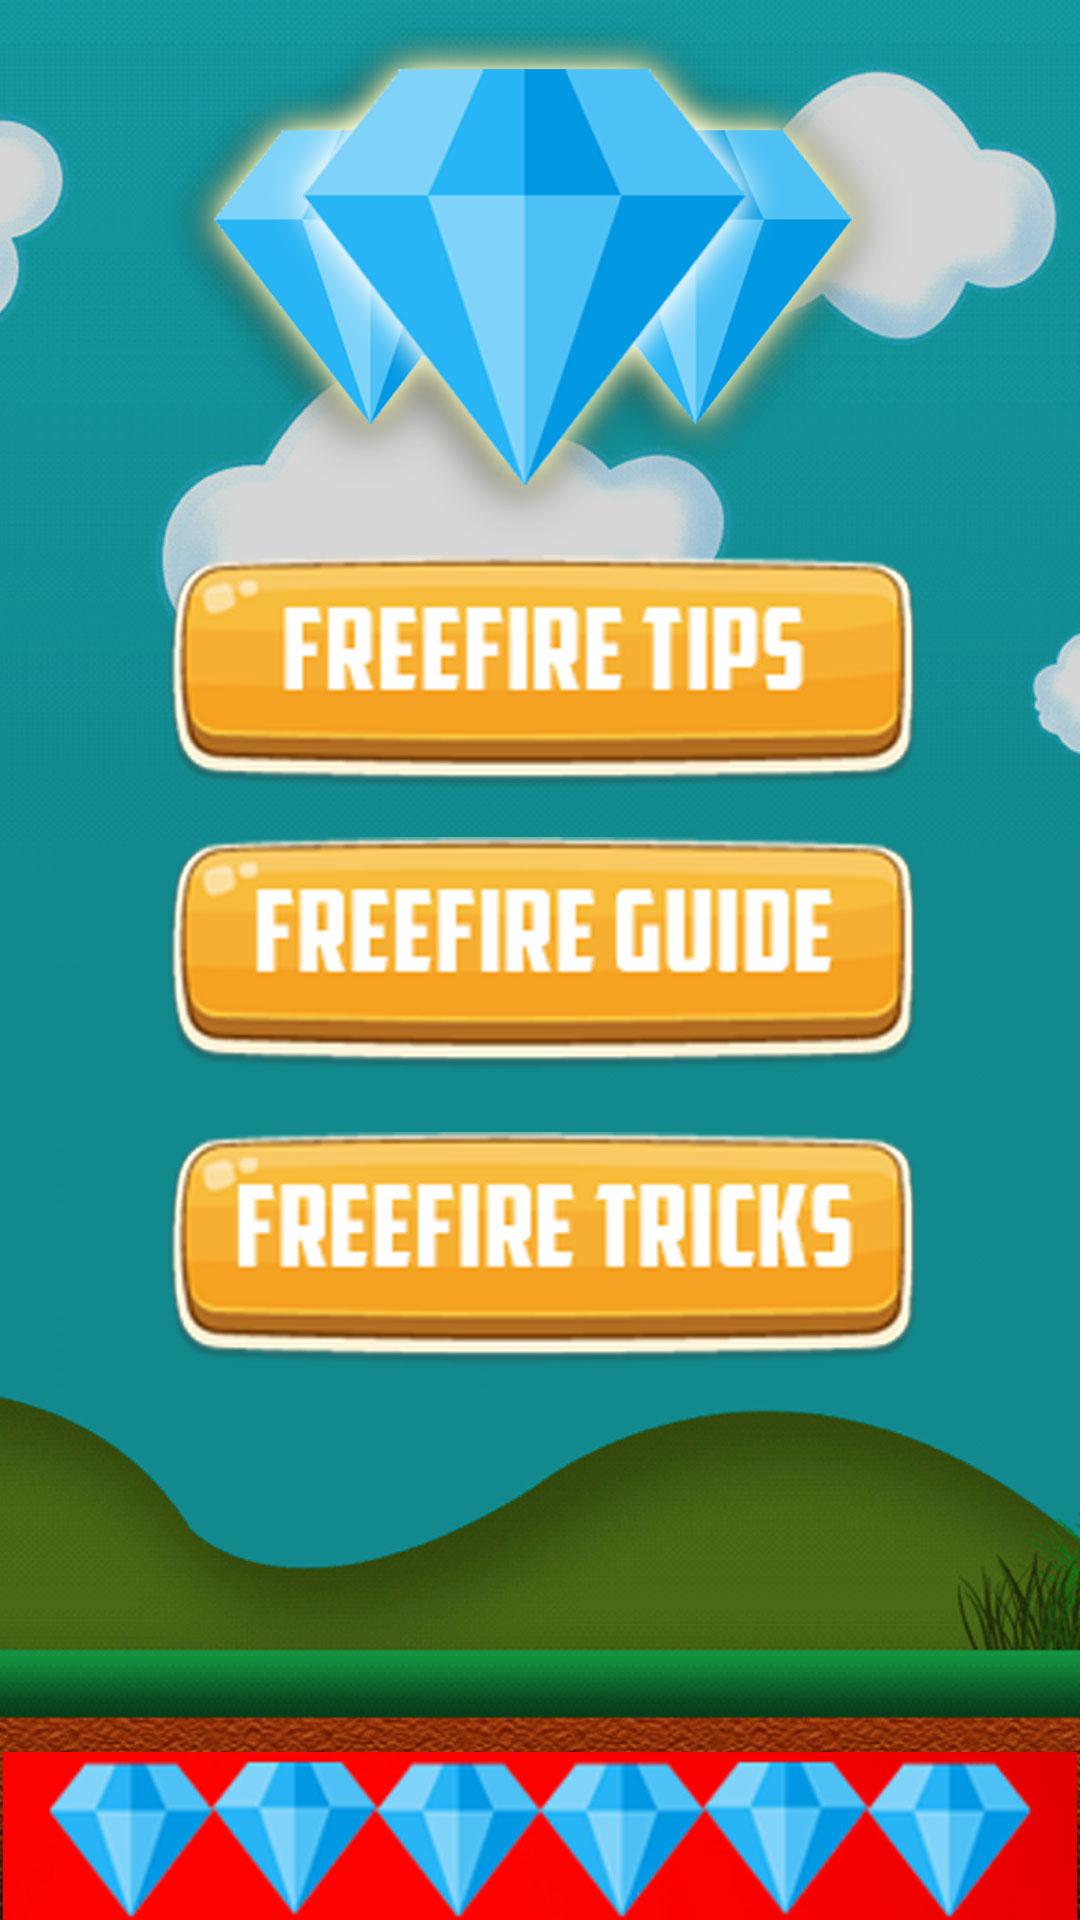 Cheats for Garena Free Fire for Android - APK Download - 